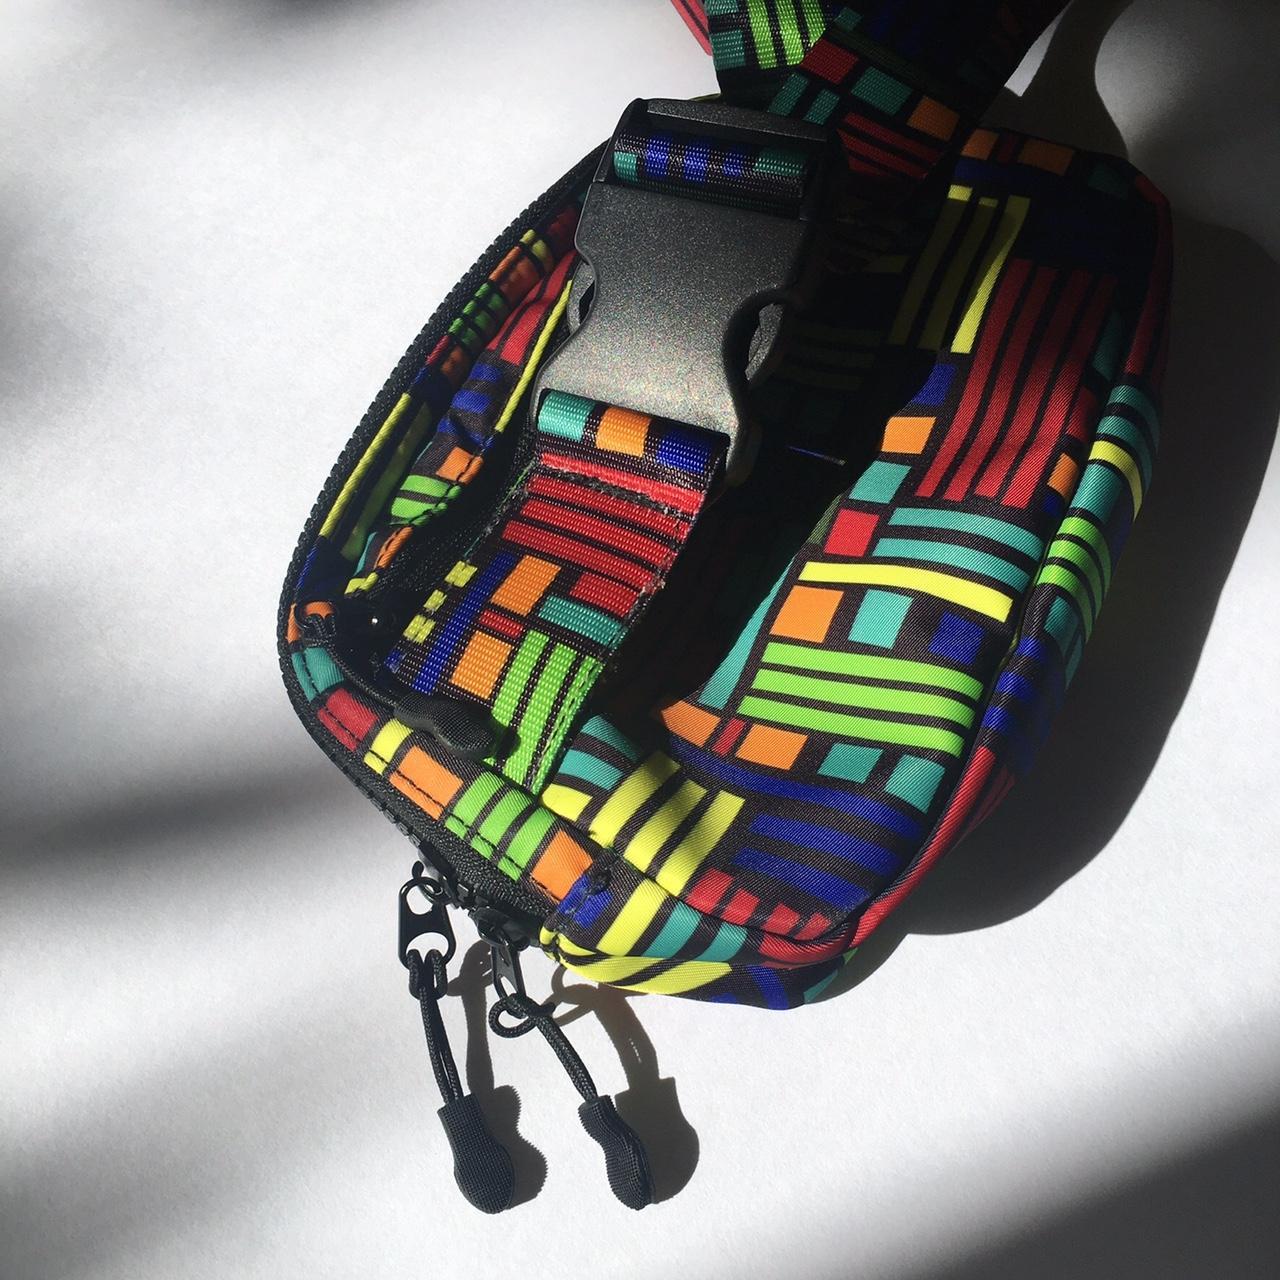 Product Image 3 - Diop the Weka Fanny Pack

Super